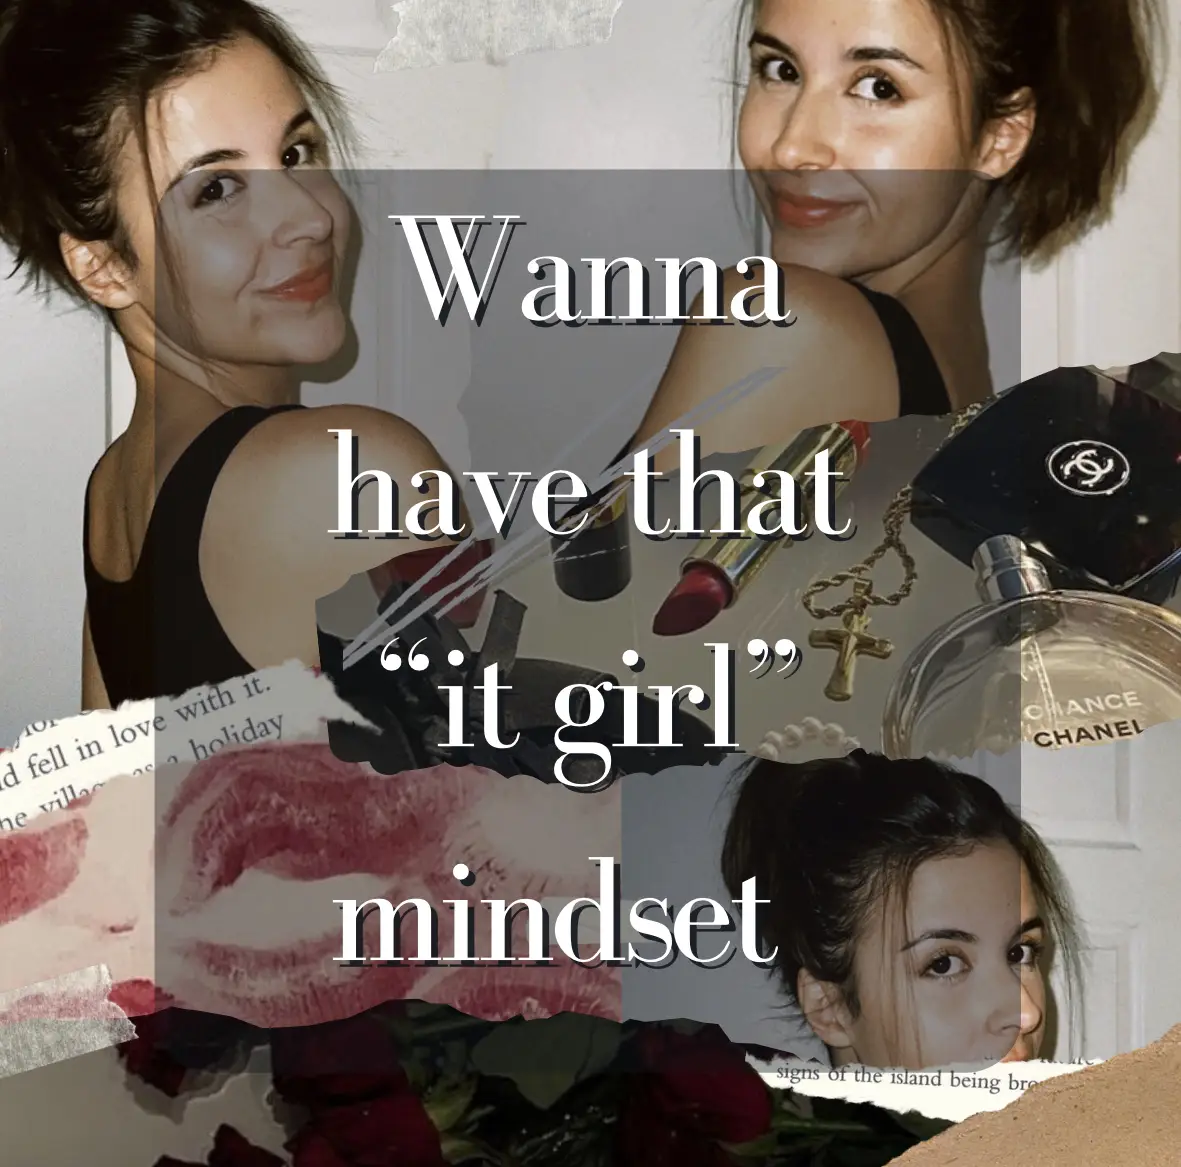  A collage of four pictures of women with the words "want that it girl" written above them.